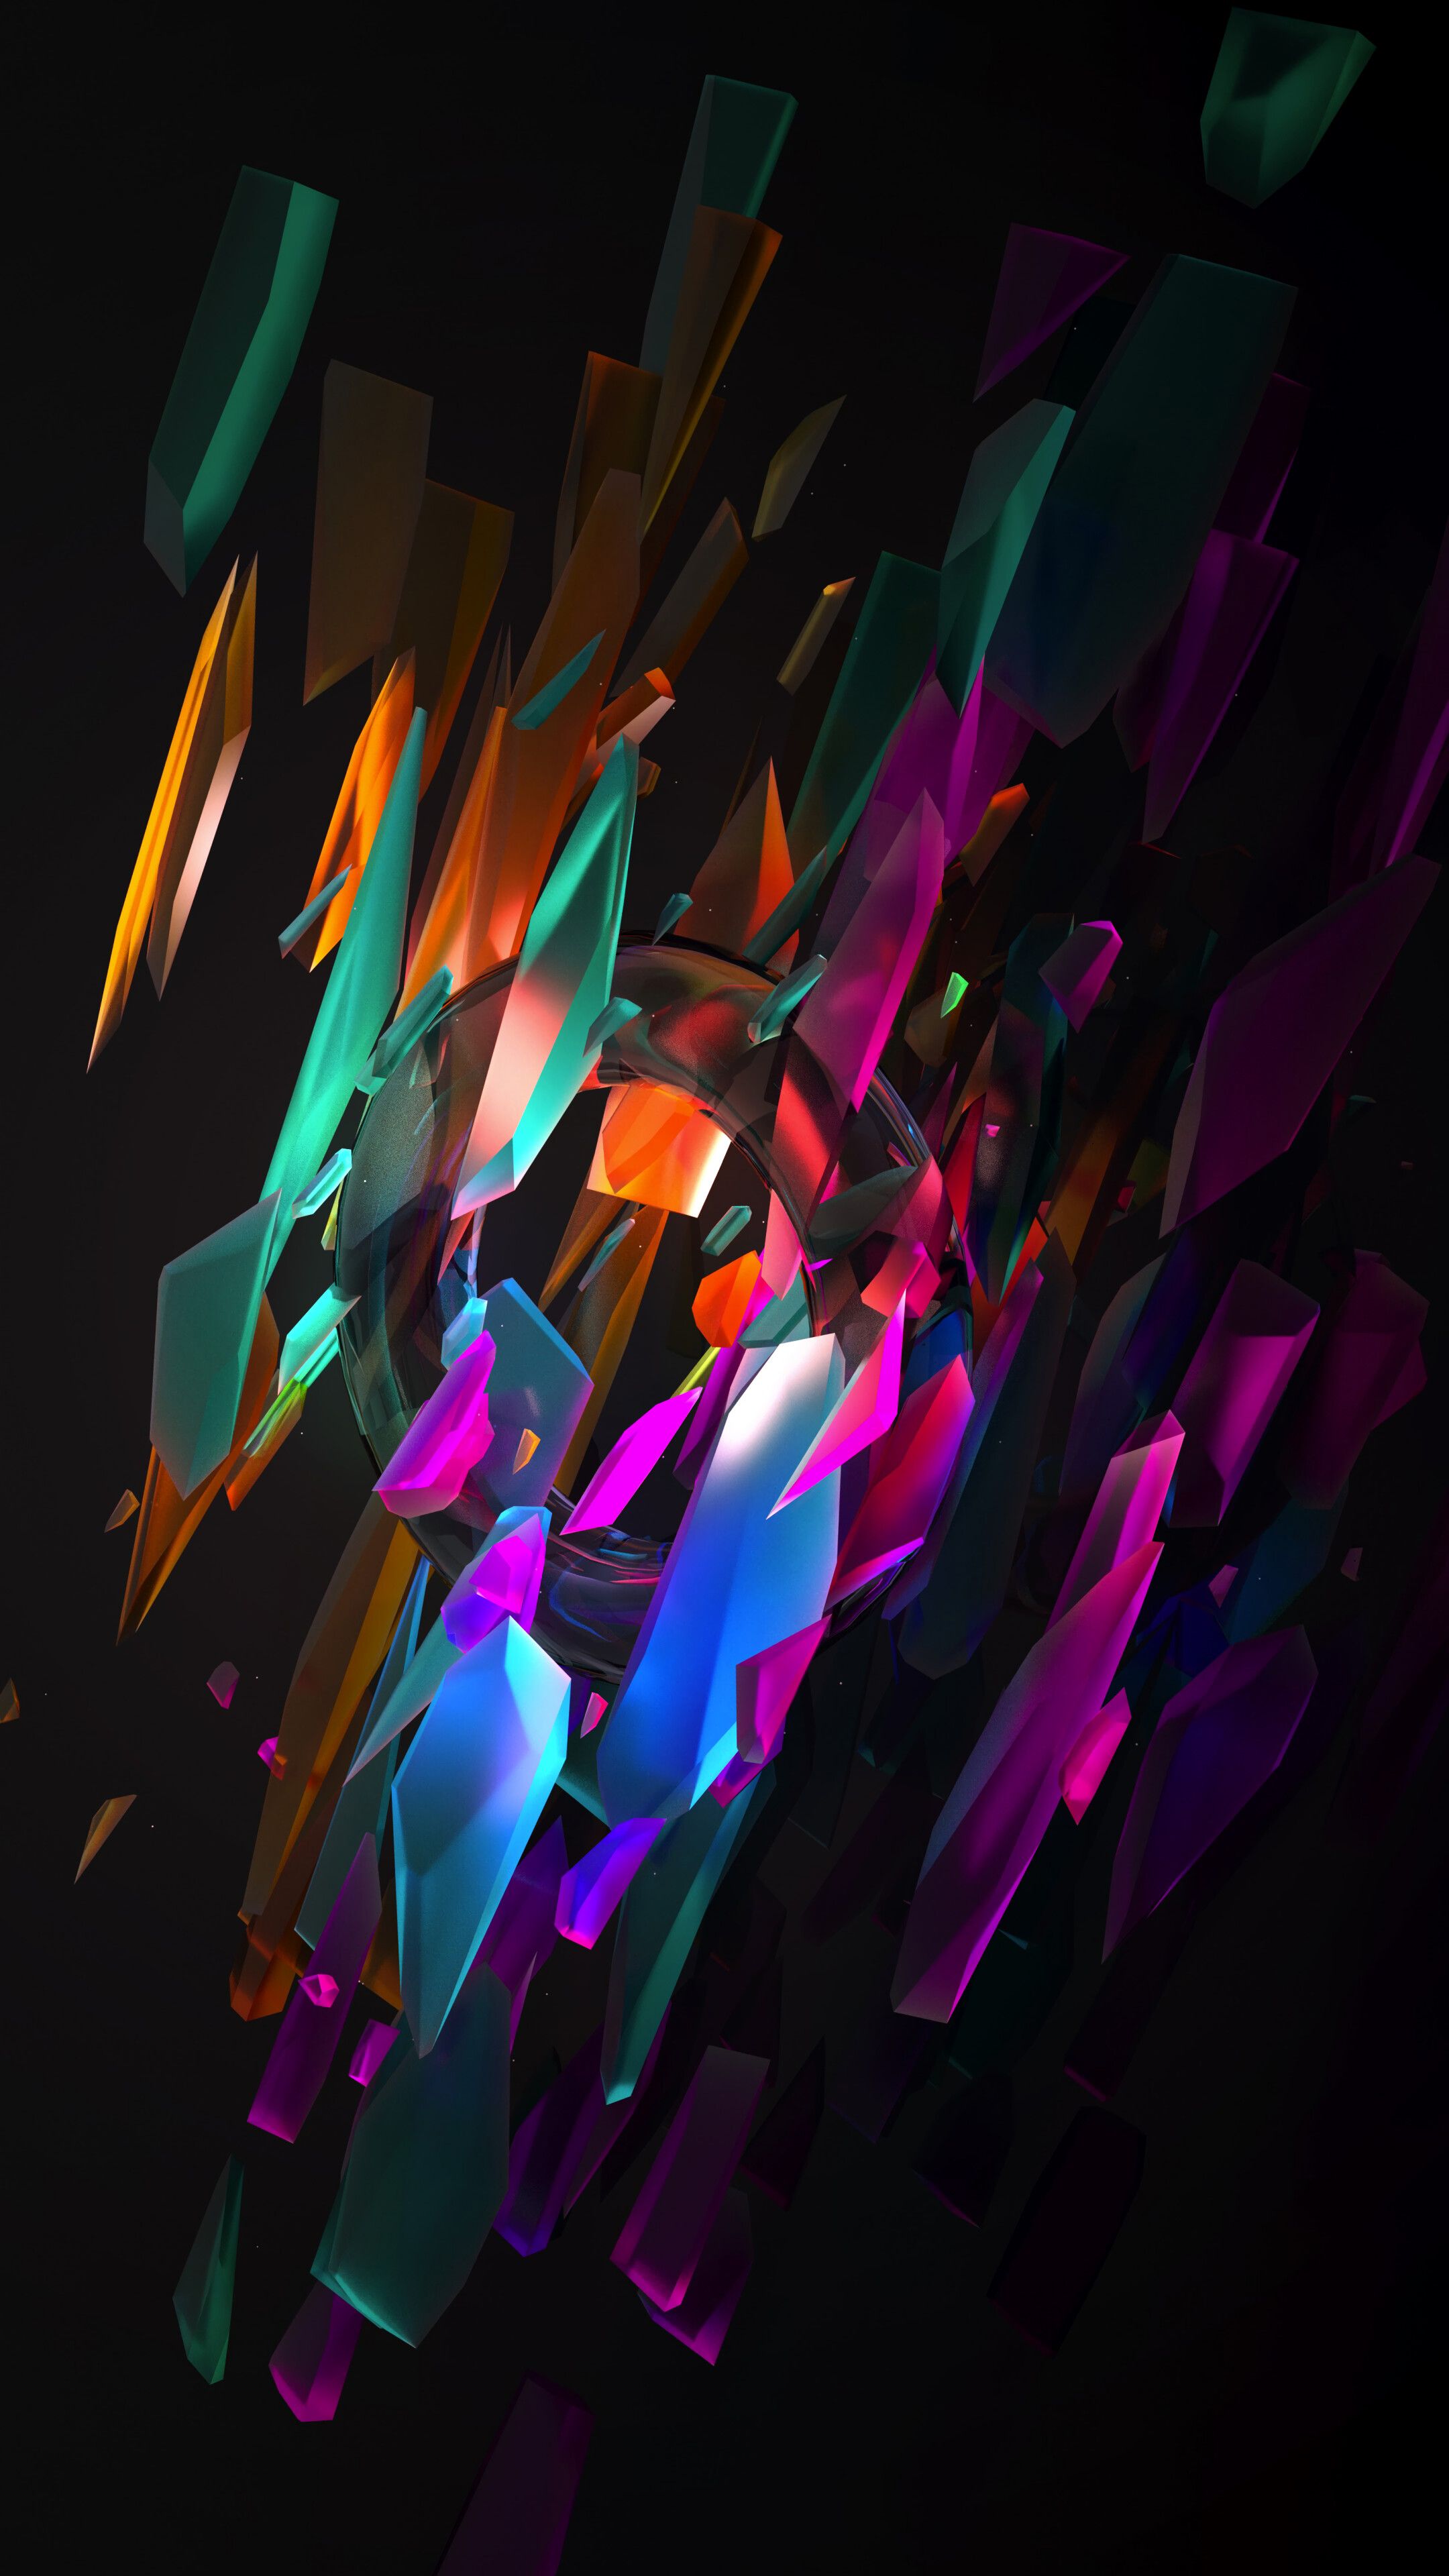 Colorful, Abstract, 3D, Digital Art, 4K phone HD Wallpaper, Image, Background, Photo and Picture. Mocah HD Wallpaper